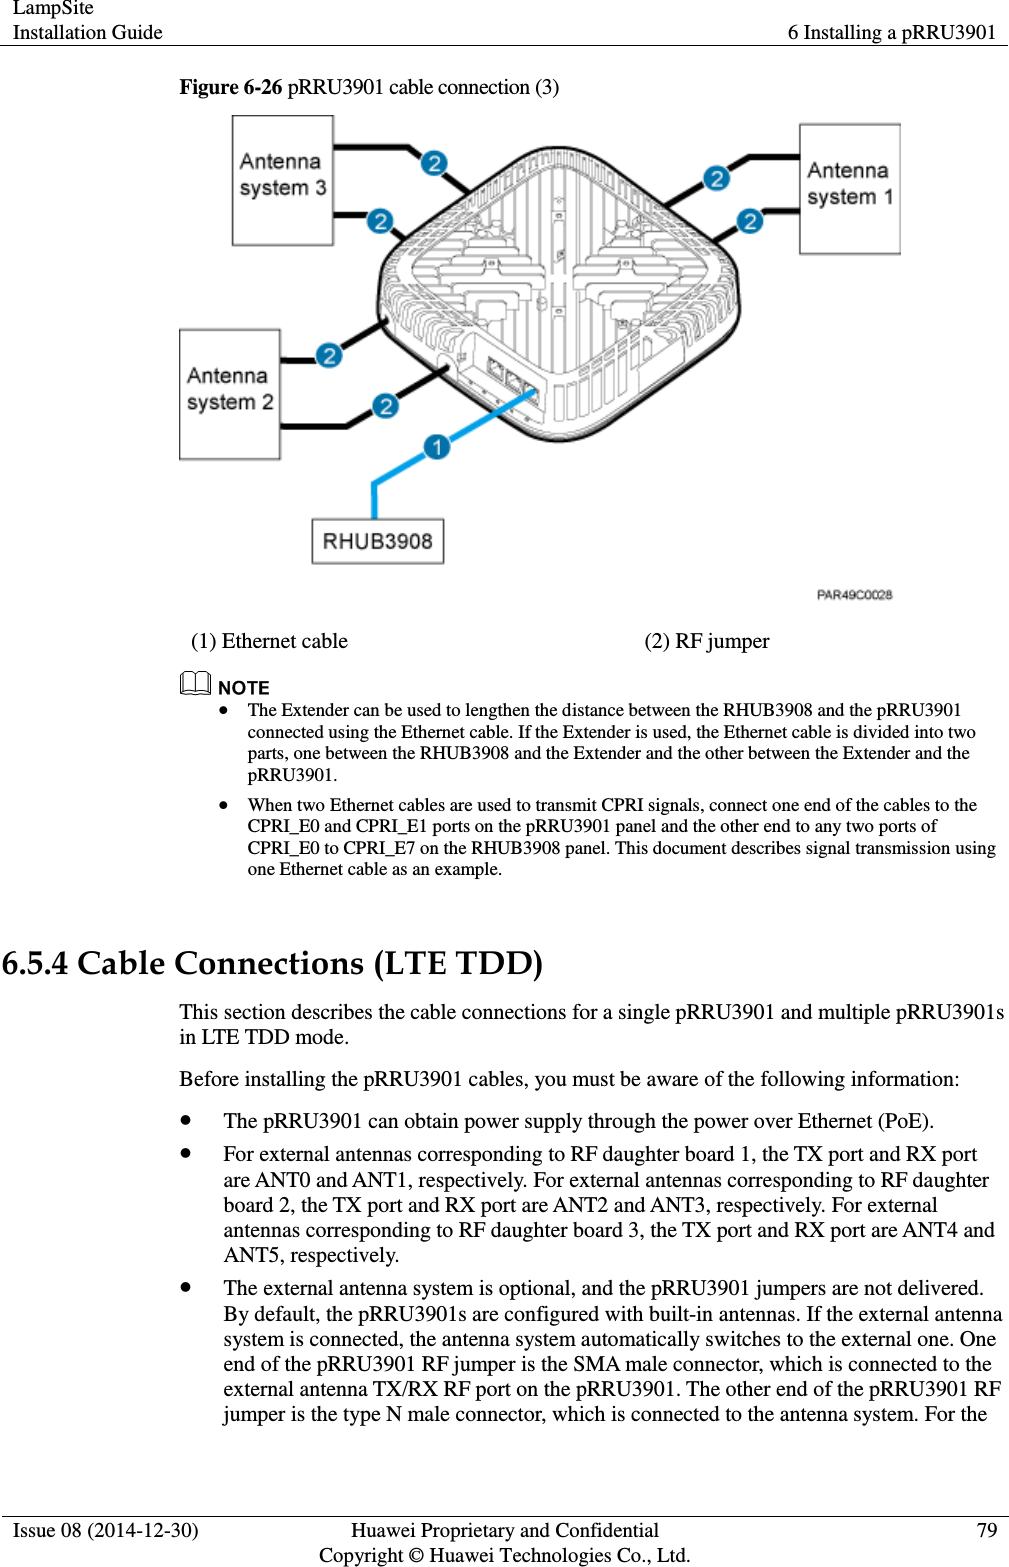 LampSite Installation Guide 6 Installing a pRRU3901  Issue 08 (2014-12-30) Huawei Proprietary and Confidential                                     Copyright © Huawei Technologies Co., Ltd. 79  Figure 6-26 pRRU3901 cable connection (3)  (1) Ethernet cable (2) RF jumper   The Extender can be used to lengthen the distance between the RHUB3908 and the pRRU3901 connected using the Ethernet cable. If the Extender is used, the Ethernet cable is divided into two parts, one between the RHUB3908 and the Extender and the other between the Extender and the pRRU3901.  When two Ethernet cables are used to transmit CPRI signals, connect one end of the cables to the CPRI_E0 and CPRI_E1 ports on the pRRU3901 panel and the other end to any two ports of CPRI_E0 to CPRI_E7 on the RHUB3908 panel. This document describes signal transmission using one Ethernet cable as an example.  6.5.4 Cable Connections (LTE TDD) This section describes the cable connections for a single pRRU3901 and multiple pRRU3901s in LTE TDD mode. Before installing the pRRU3901 cables, you must be aware of the following information:  The pRRU3901 can obtain power supply through the power over Ethernet (PoE).  For external antennas corresponding to RF daughter board 1, the TX port and RX port are ANT0 and ANT1, respectively. For external antennas corresponding to RF daughter board 2, the TX port and RX port are ANT2 and ANT3, respectively. For external antennas corresponding to RF daughter board 3, the TX port and RX port are ANT4 and ANT5, respectively.  The external antenna system is optional, and the pRRU3901 jumpers are not delivered. By default, the pRRU3901s are configured with built-in antennas. If the external antenna system is connected, the antenna system automatically switches to the external one. One end of the pRRU3901 RF jumper is the SMA male connector, which is connected to the external antenna TX/RX RF port on the pRRU3901. The other end of the pRRU3901 RF jumper is the type N male connector, which is connected to the antenna system. For the 